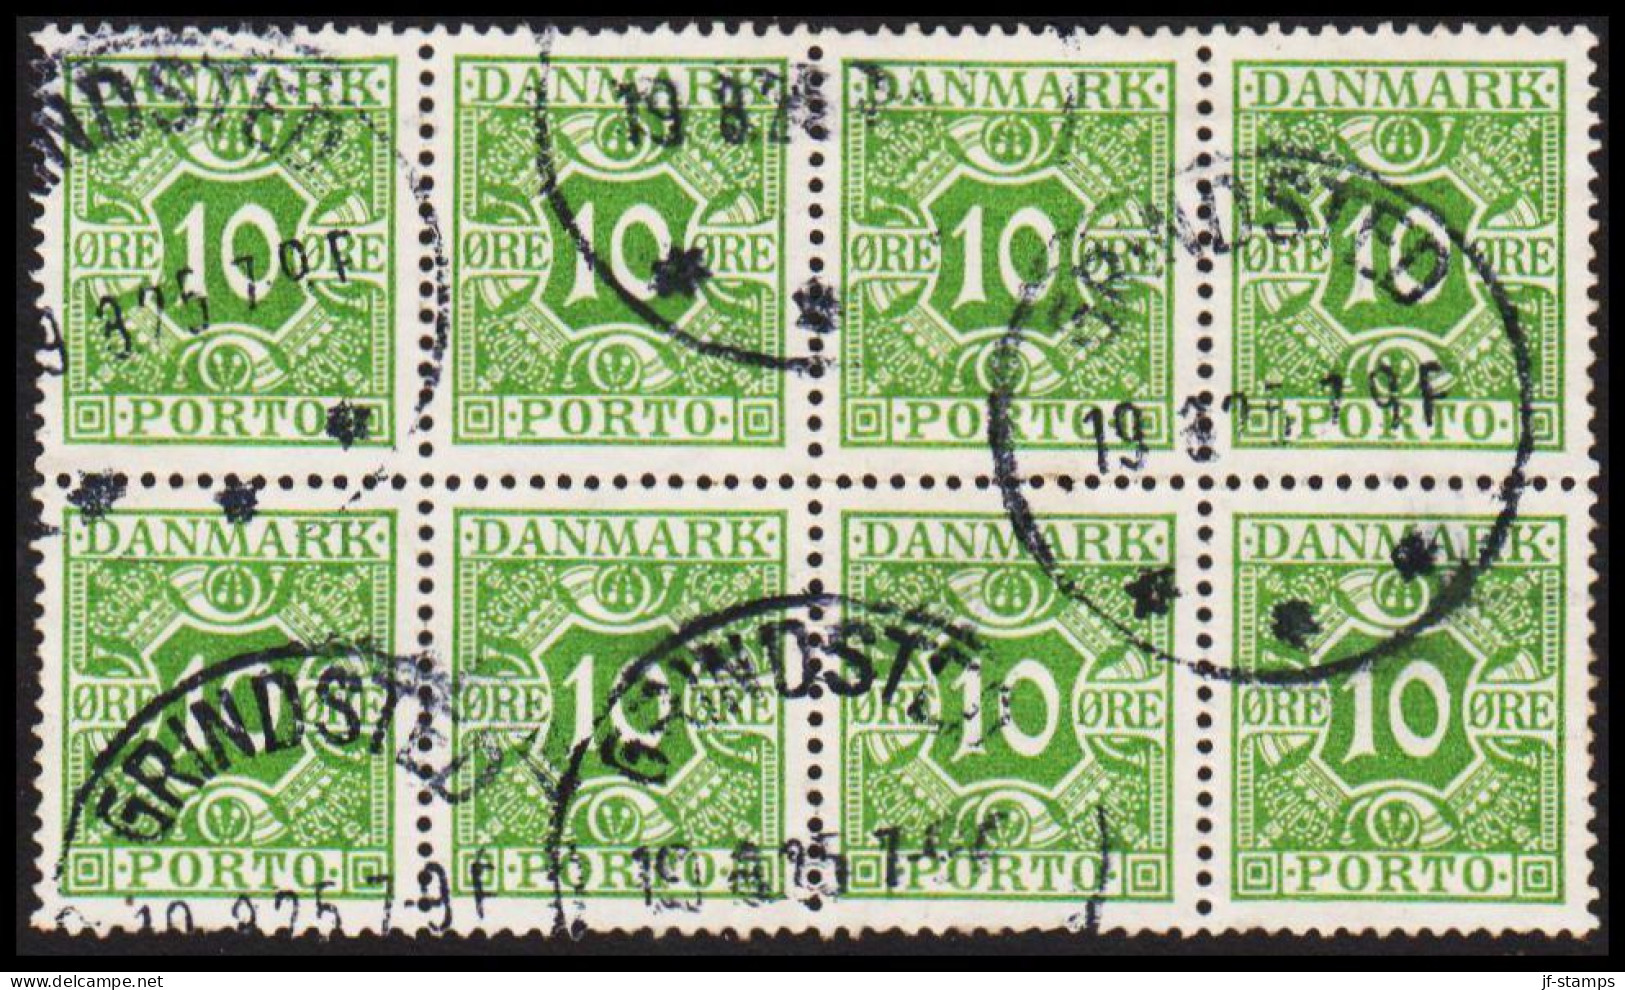 1928. Postage Due. Porto. 10 Øre Gren In 8block Cancelled GRIDSTED 19.8.25. (Michel P13) - JF545133 - Postage Due